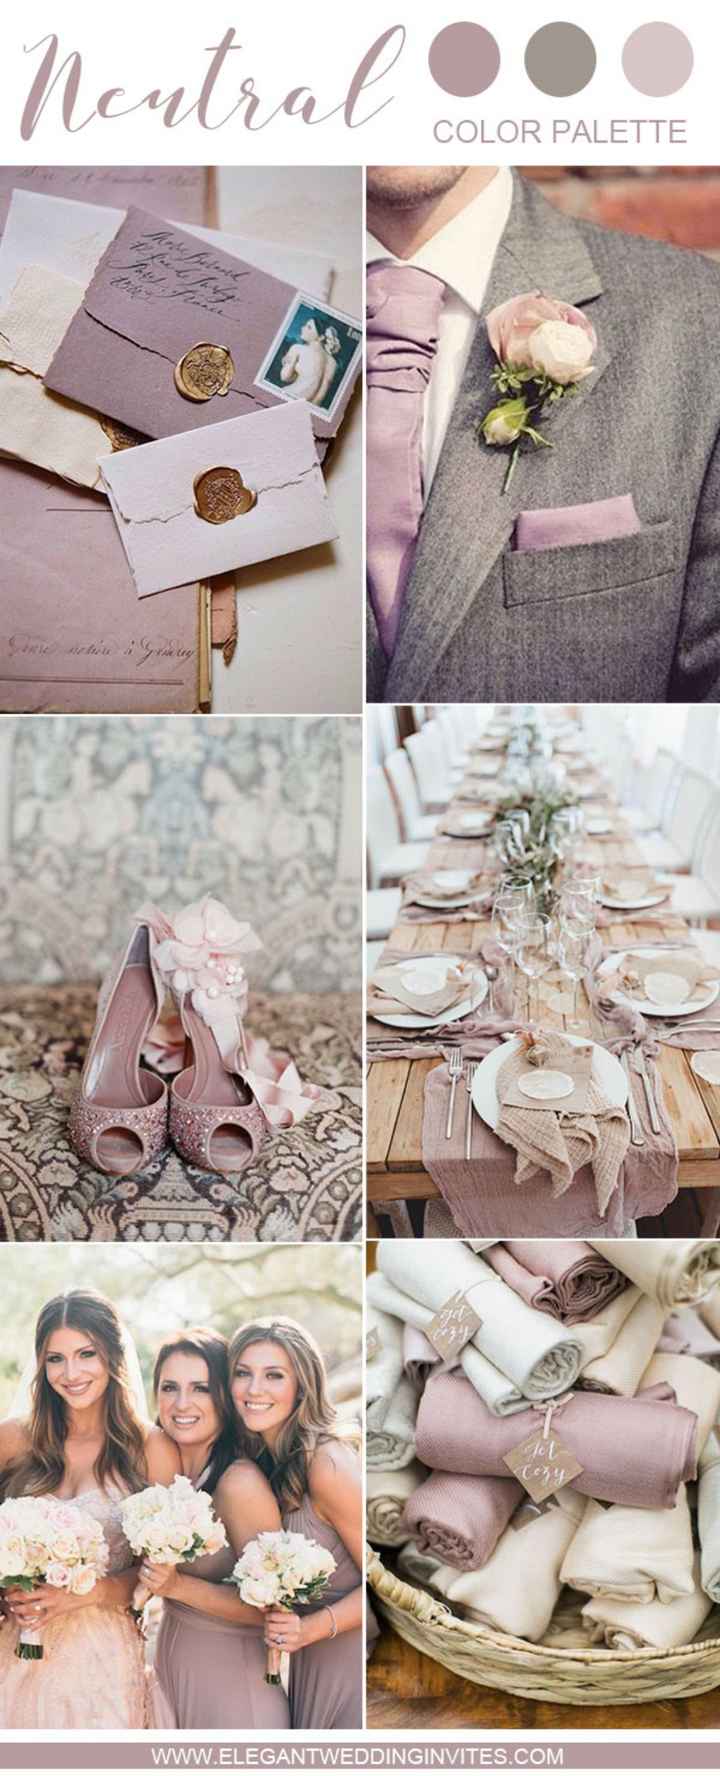 How to pick wedding colors?!! - 5